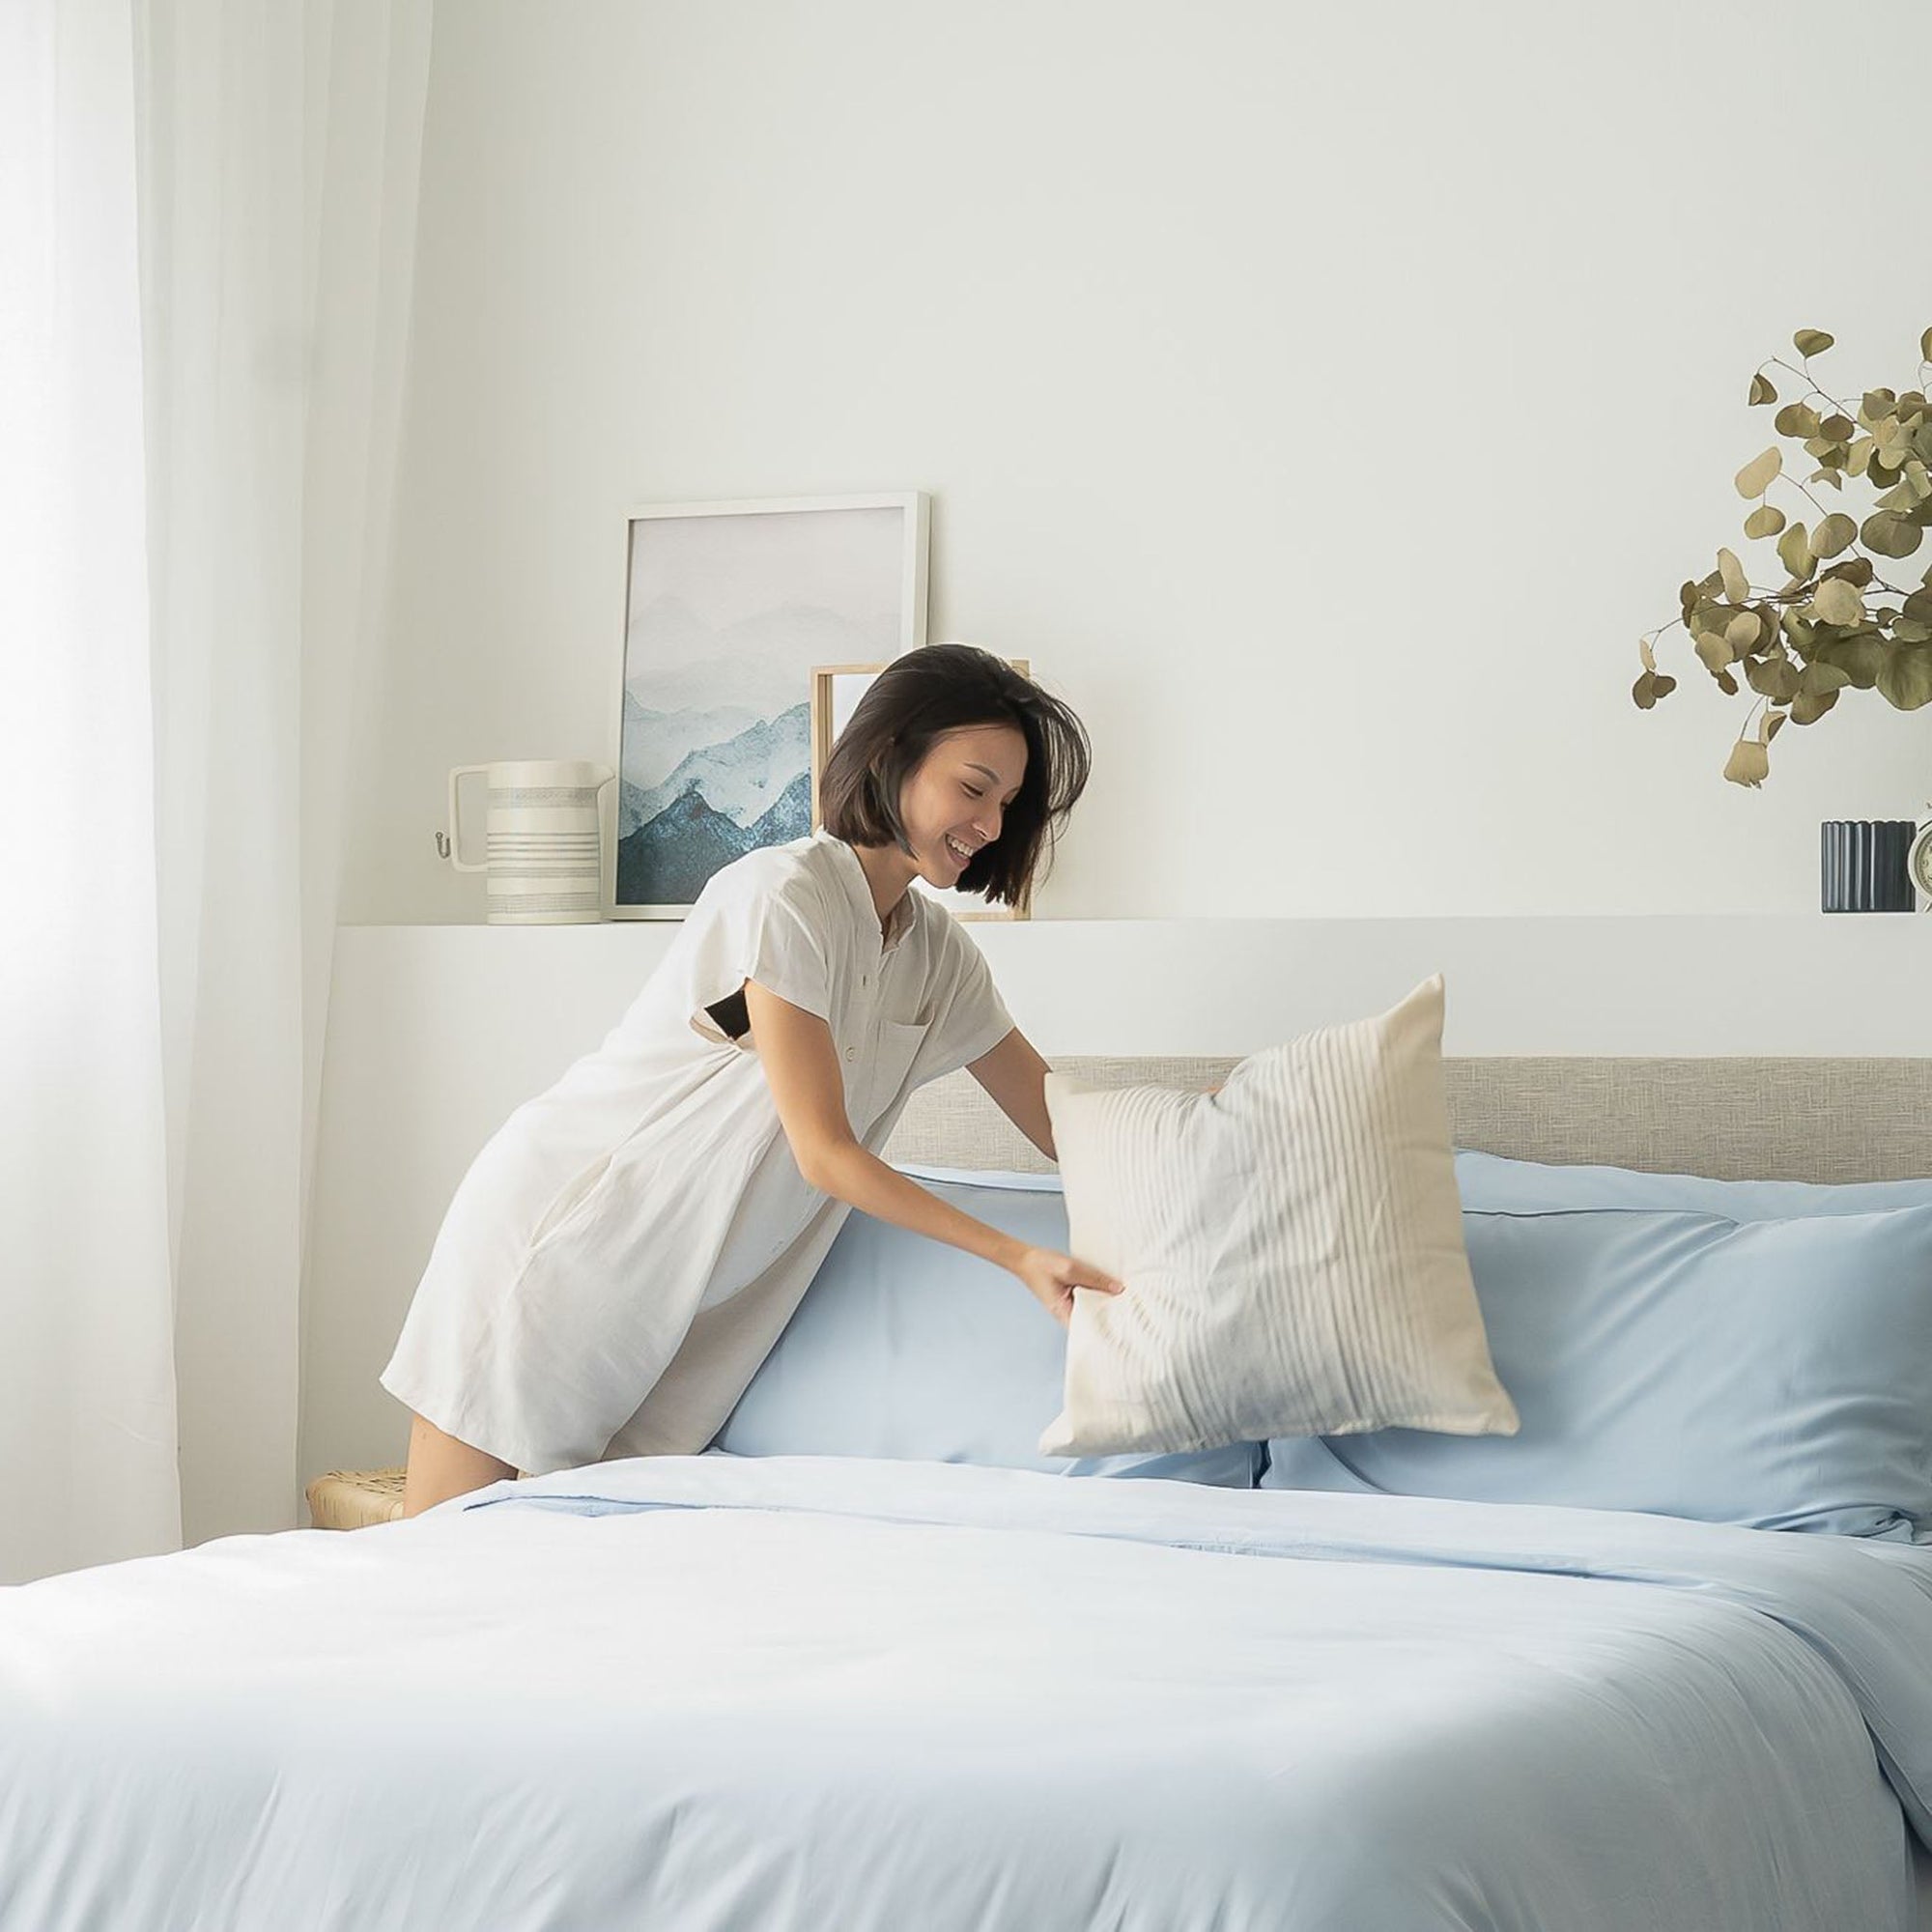 Sky Blue TENCEL Bed Sheets Classic Set with Tencel Fitted Sheet, Tencel Pillow Case, Tencel Duvet Cover. Buy Sky Blue Bed Sheets at Weavve Home, Best Bed Sheets Singapore and Luxury Hotel Sheets. 400 High Thread Count Bed Sheet. 